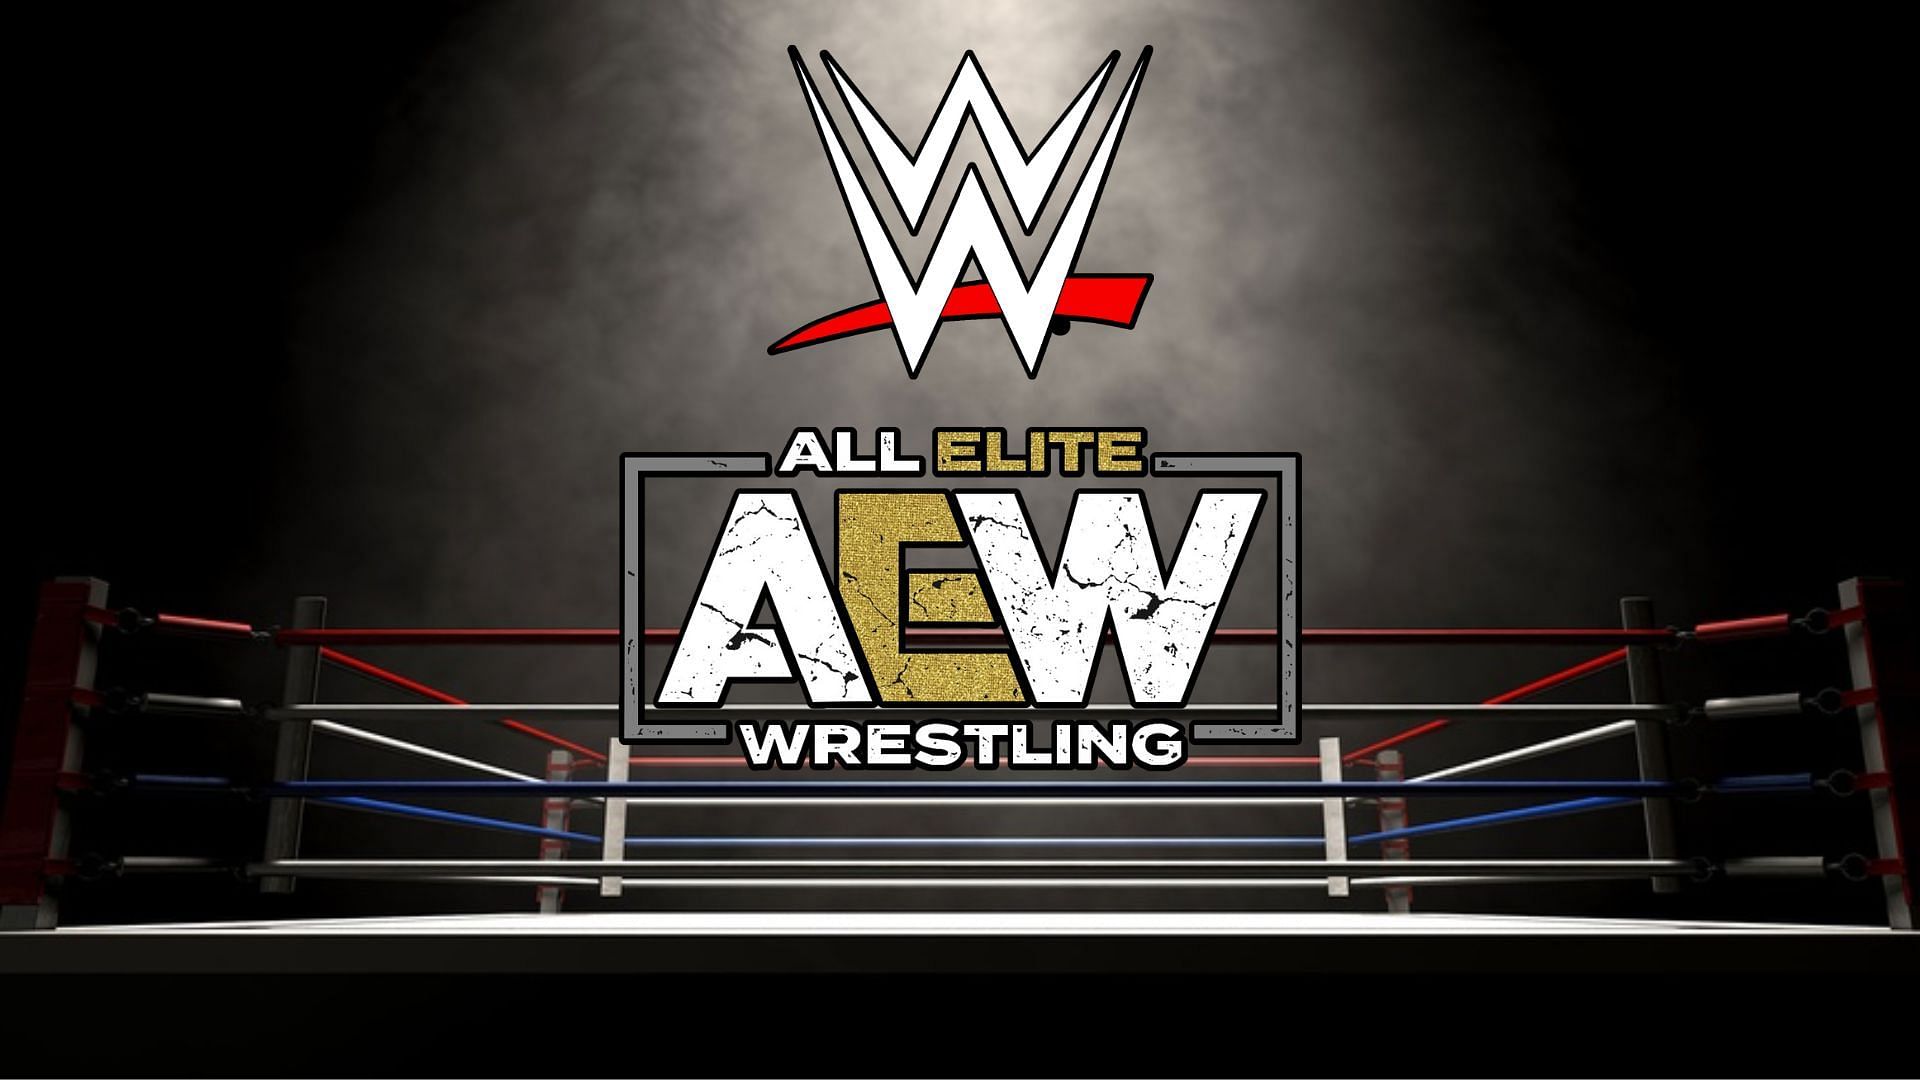 Could AEW have a serious roster relations issue&gt;